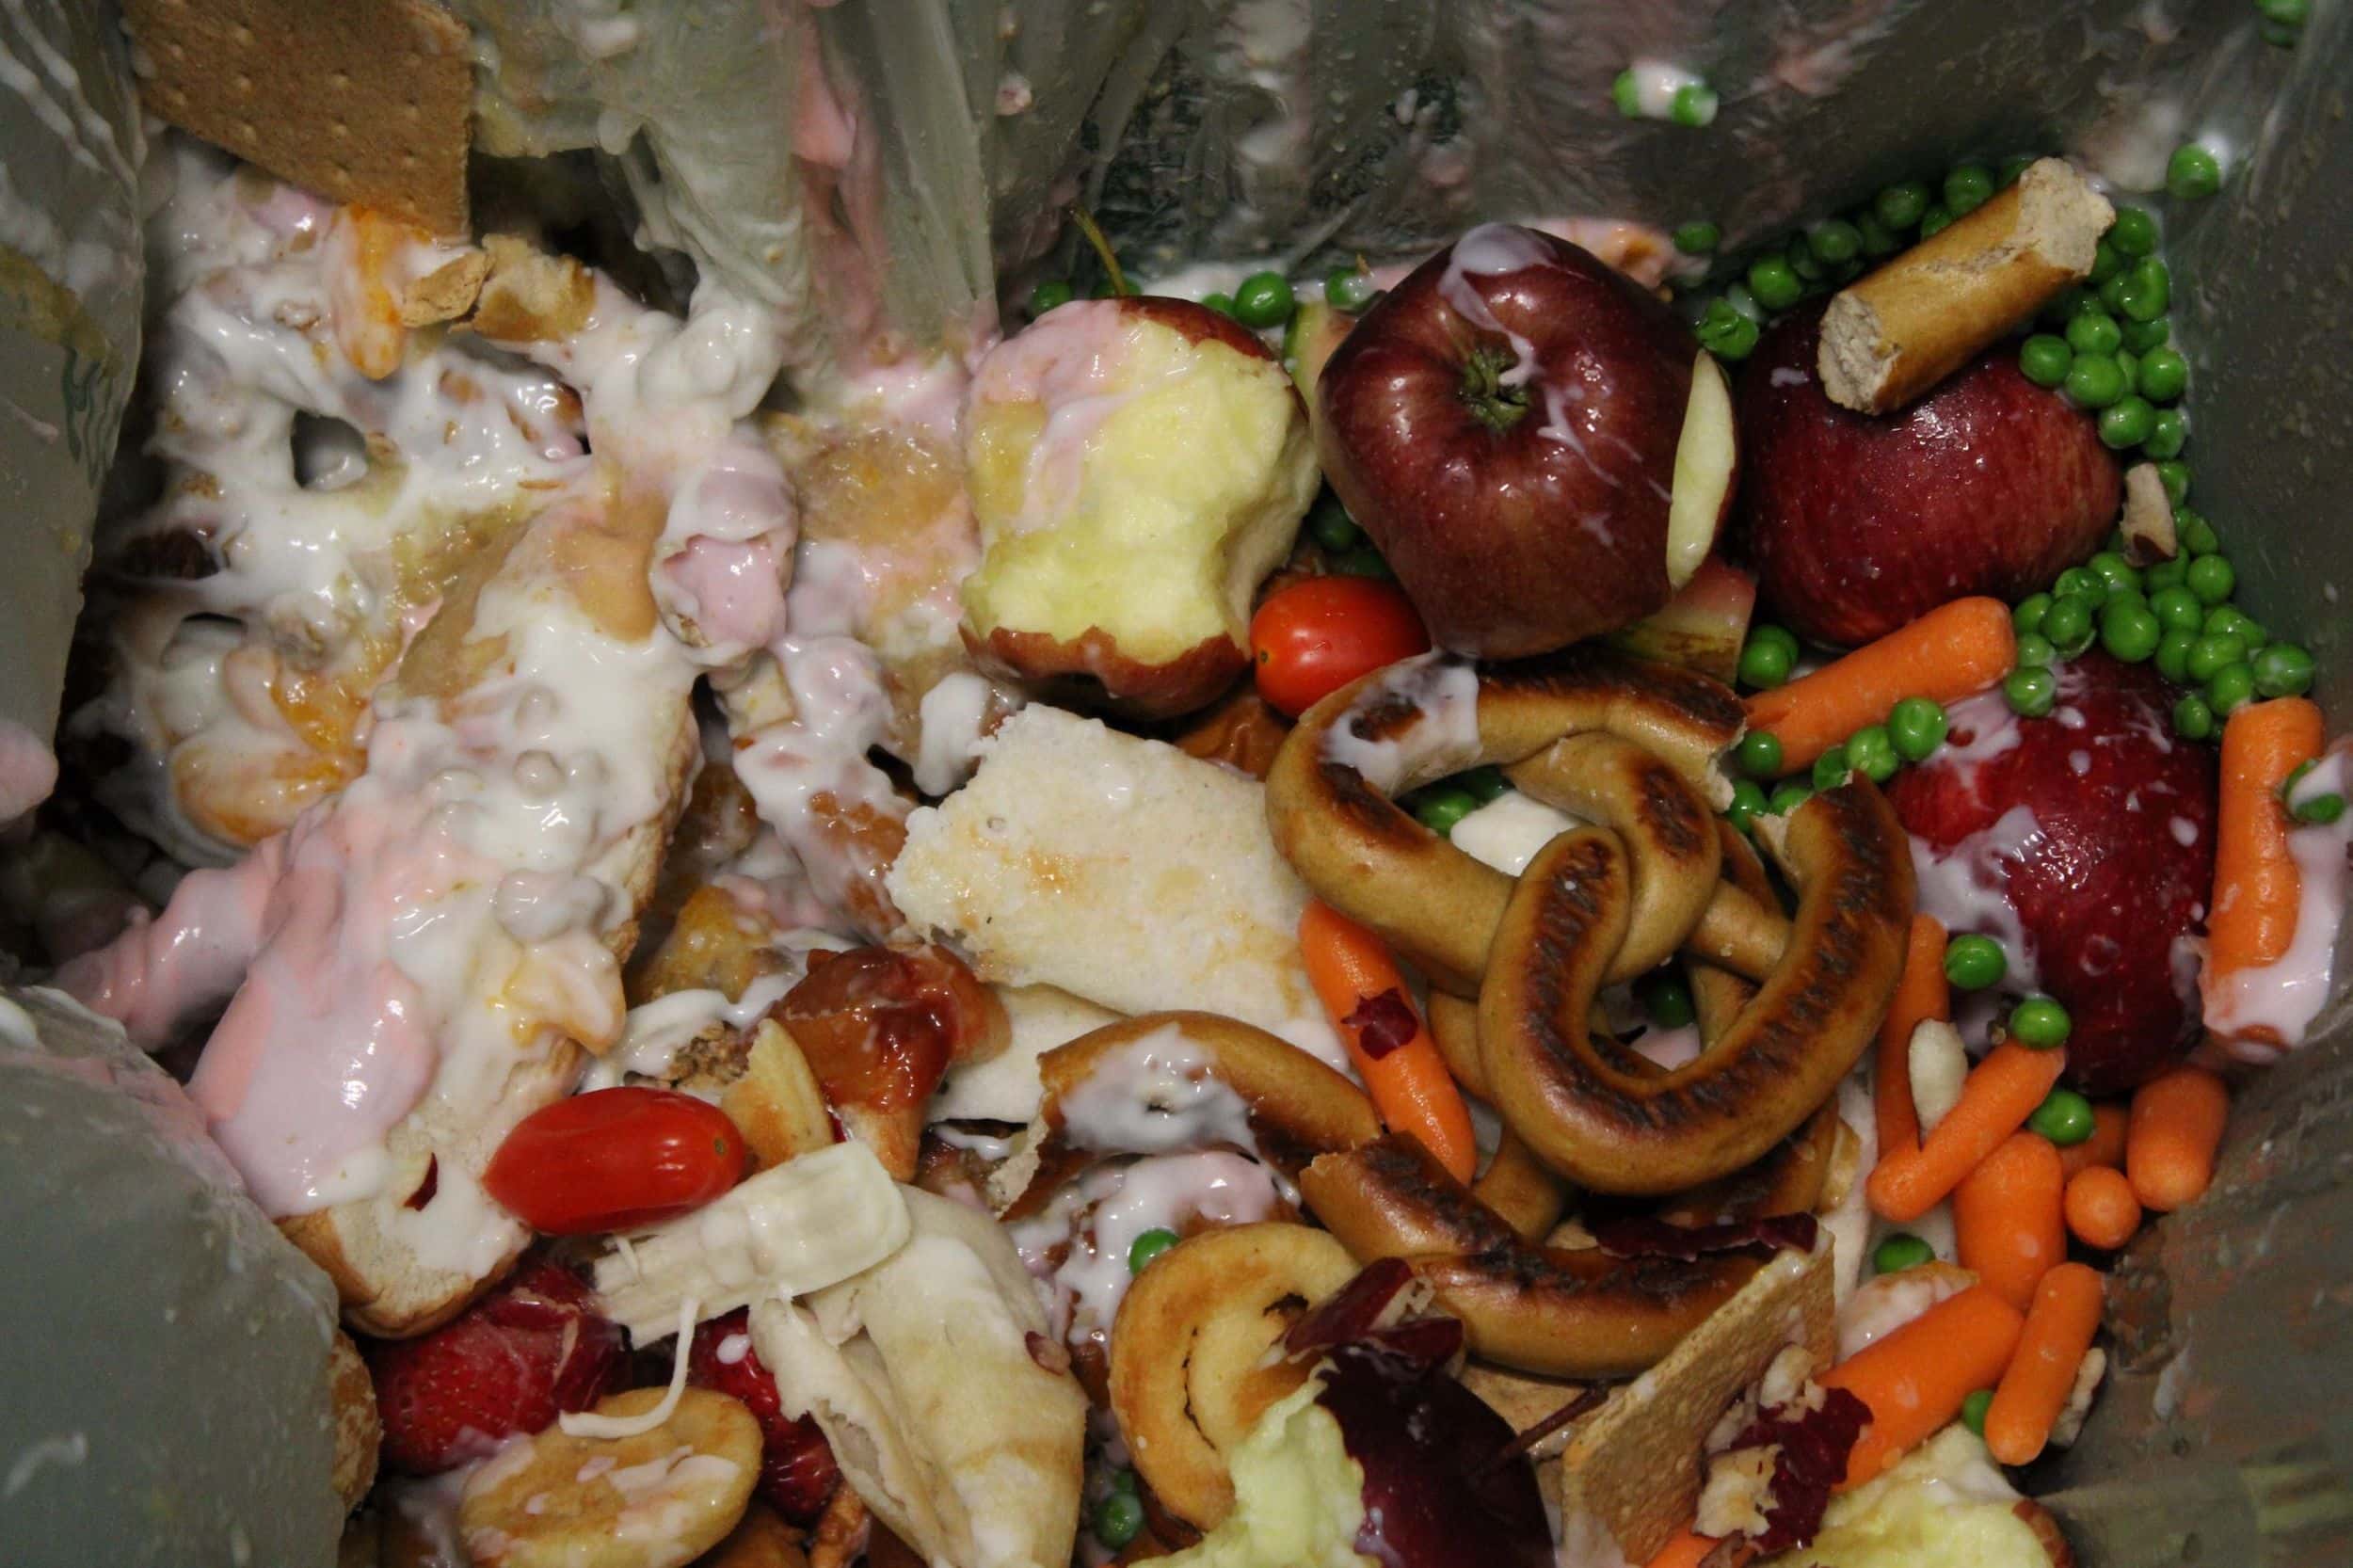 Schools finish first year of composting program